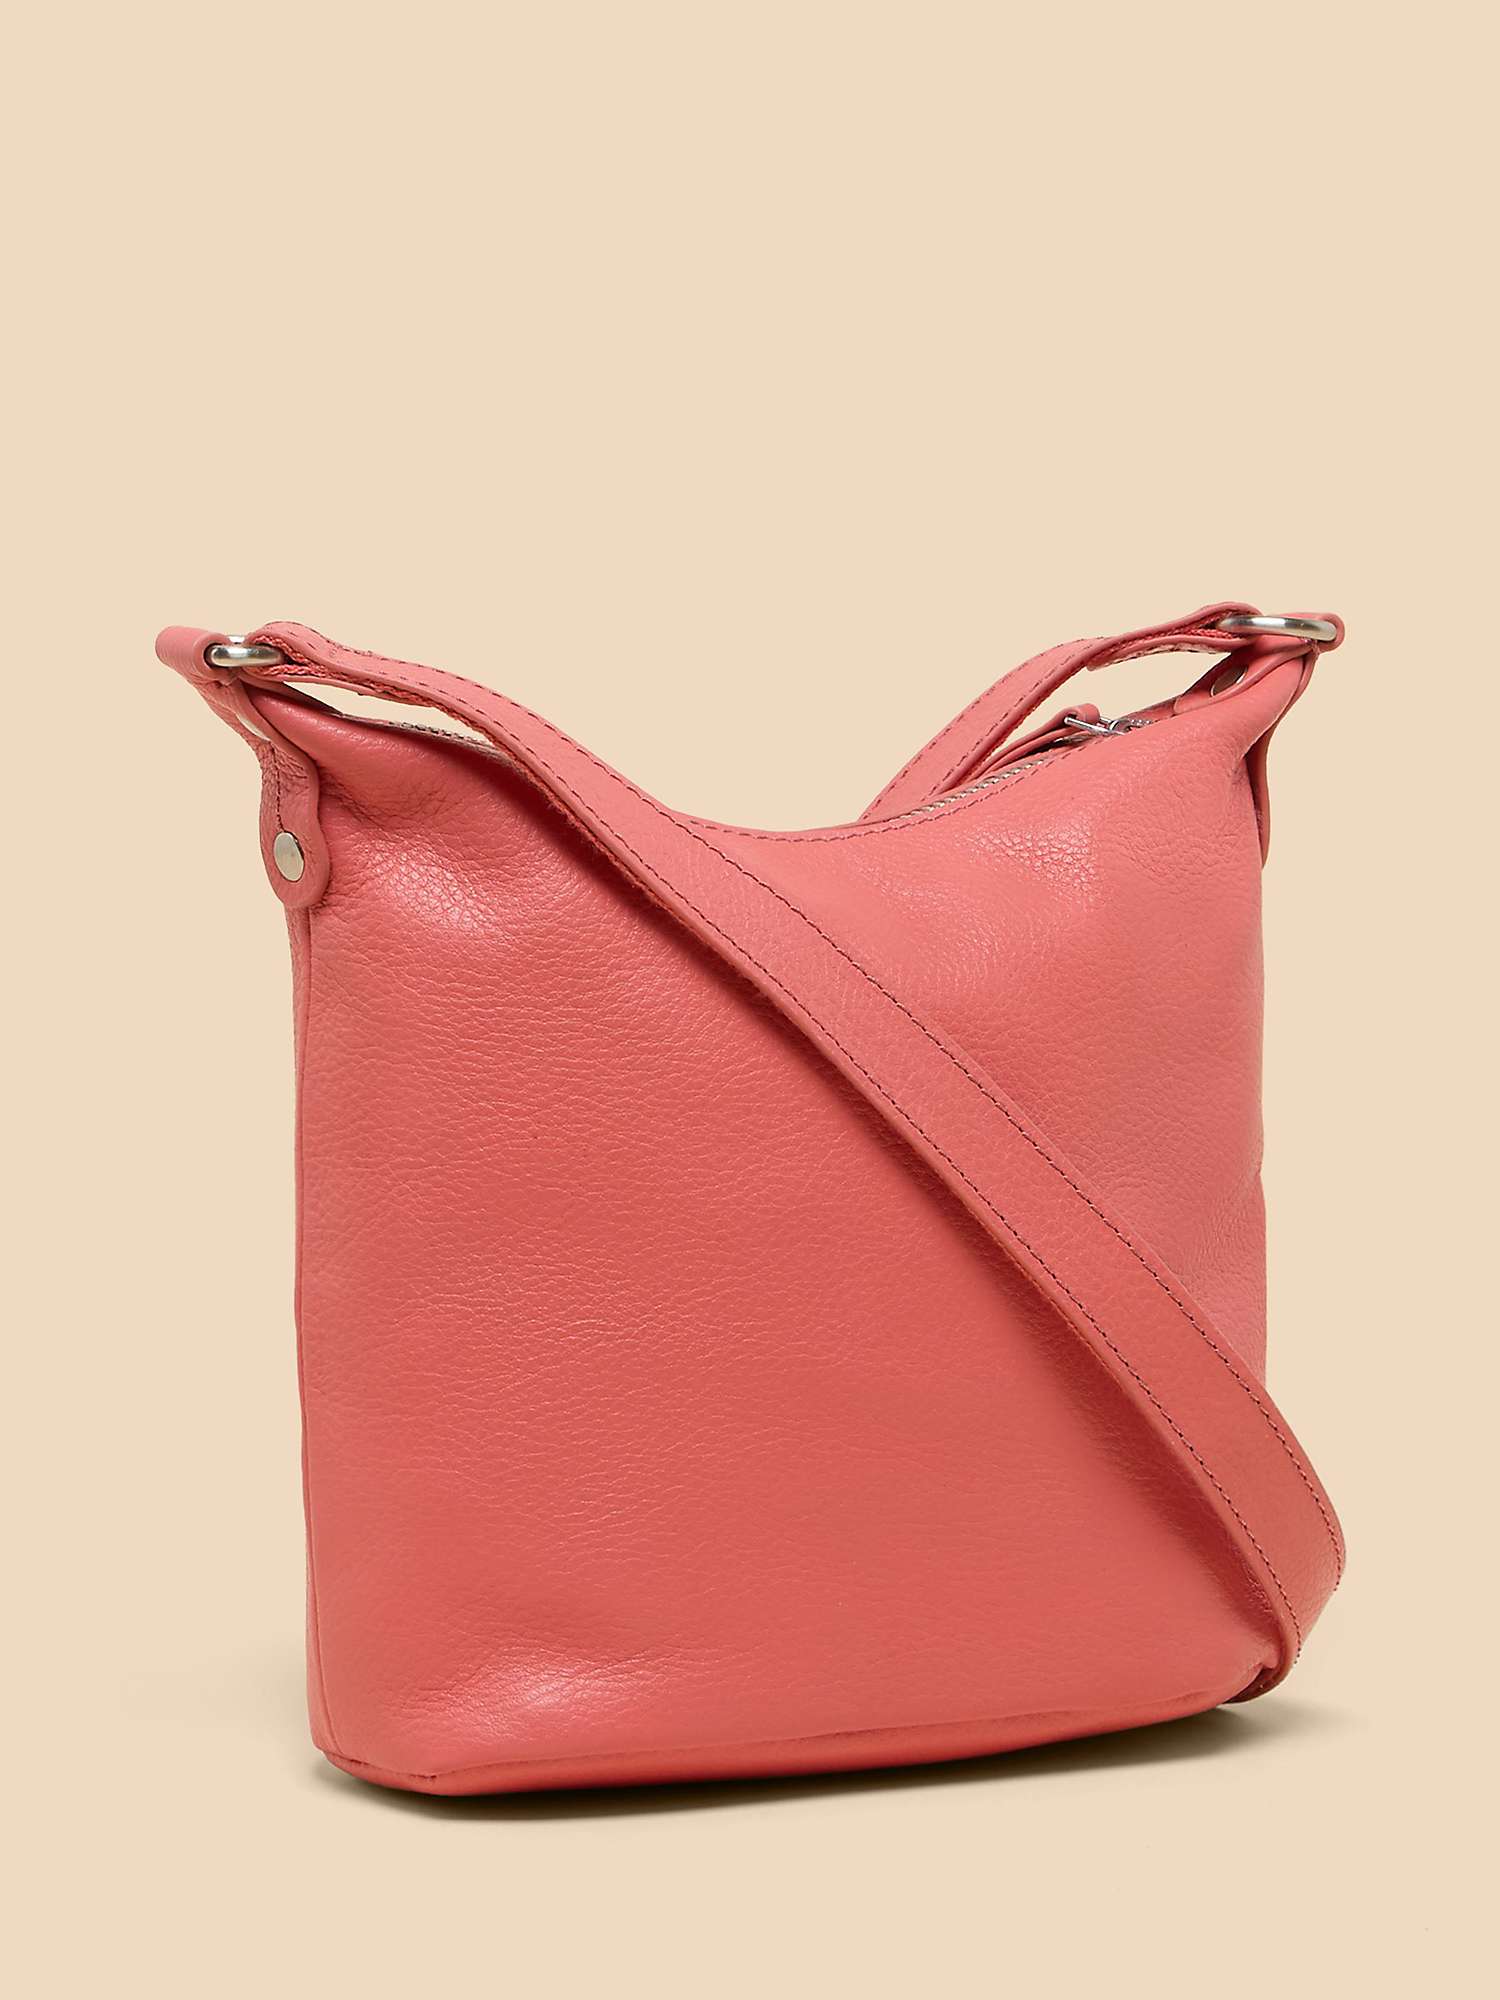 Buy White Stuff Mini Leather Crossbody Bag, Mid Coral Online at johnlewis.com